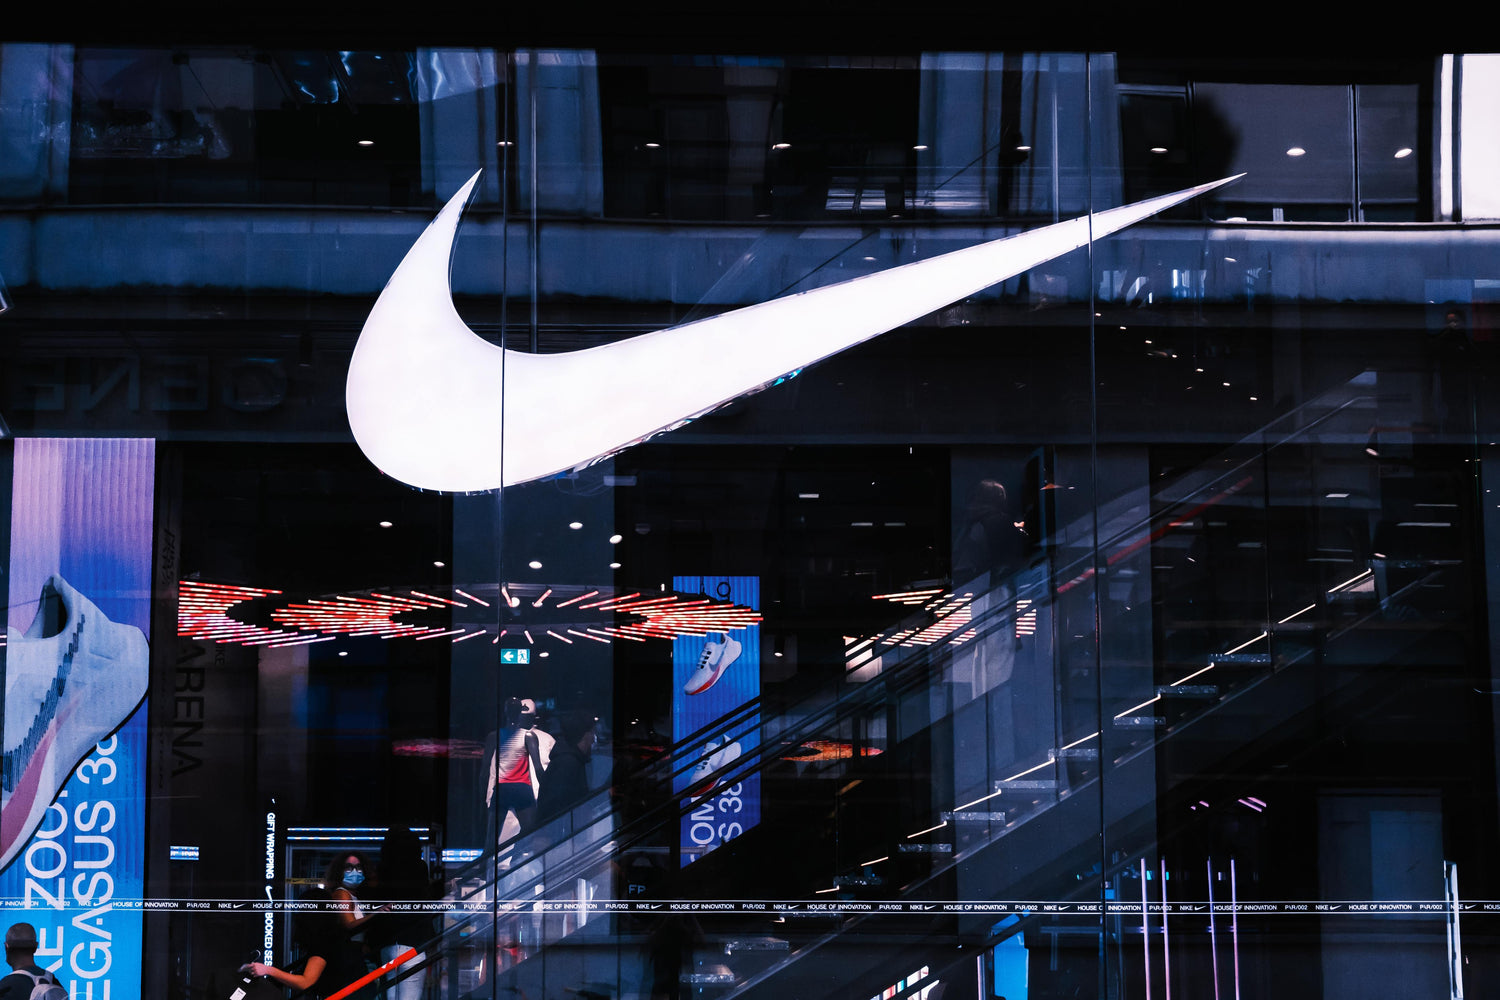 From the Air Jordan to Athleisure: Nike's Impact on Sports Fashion